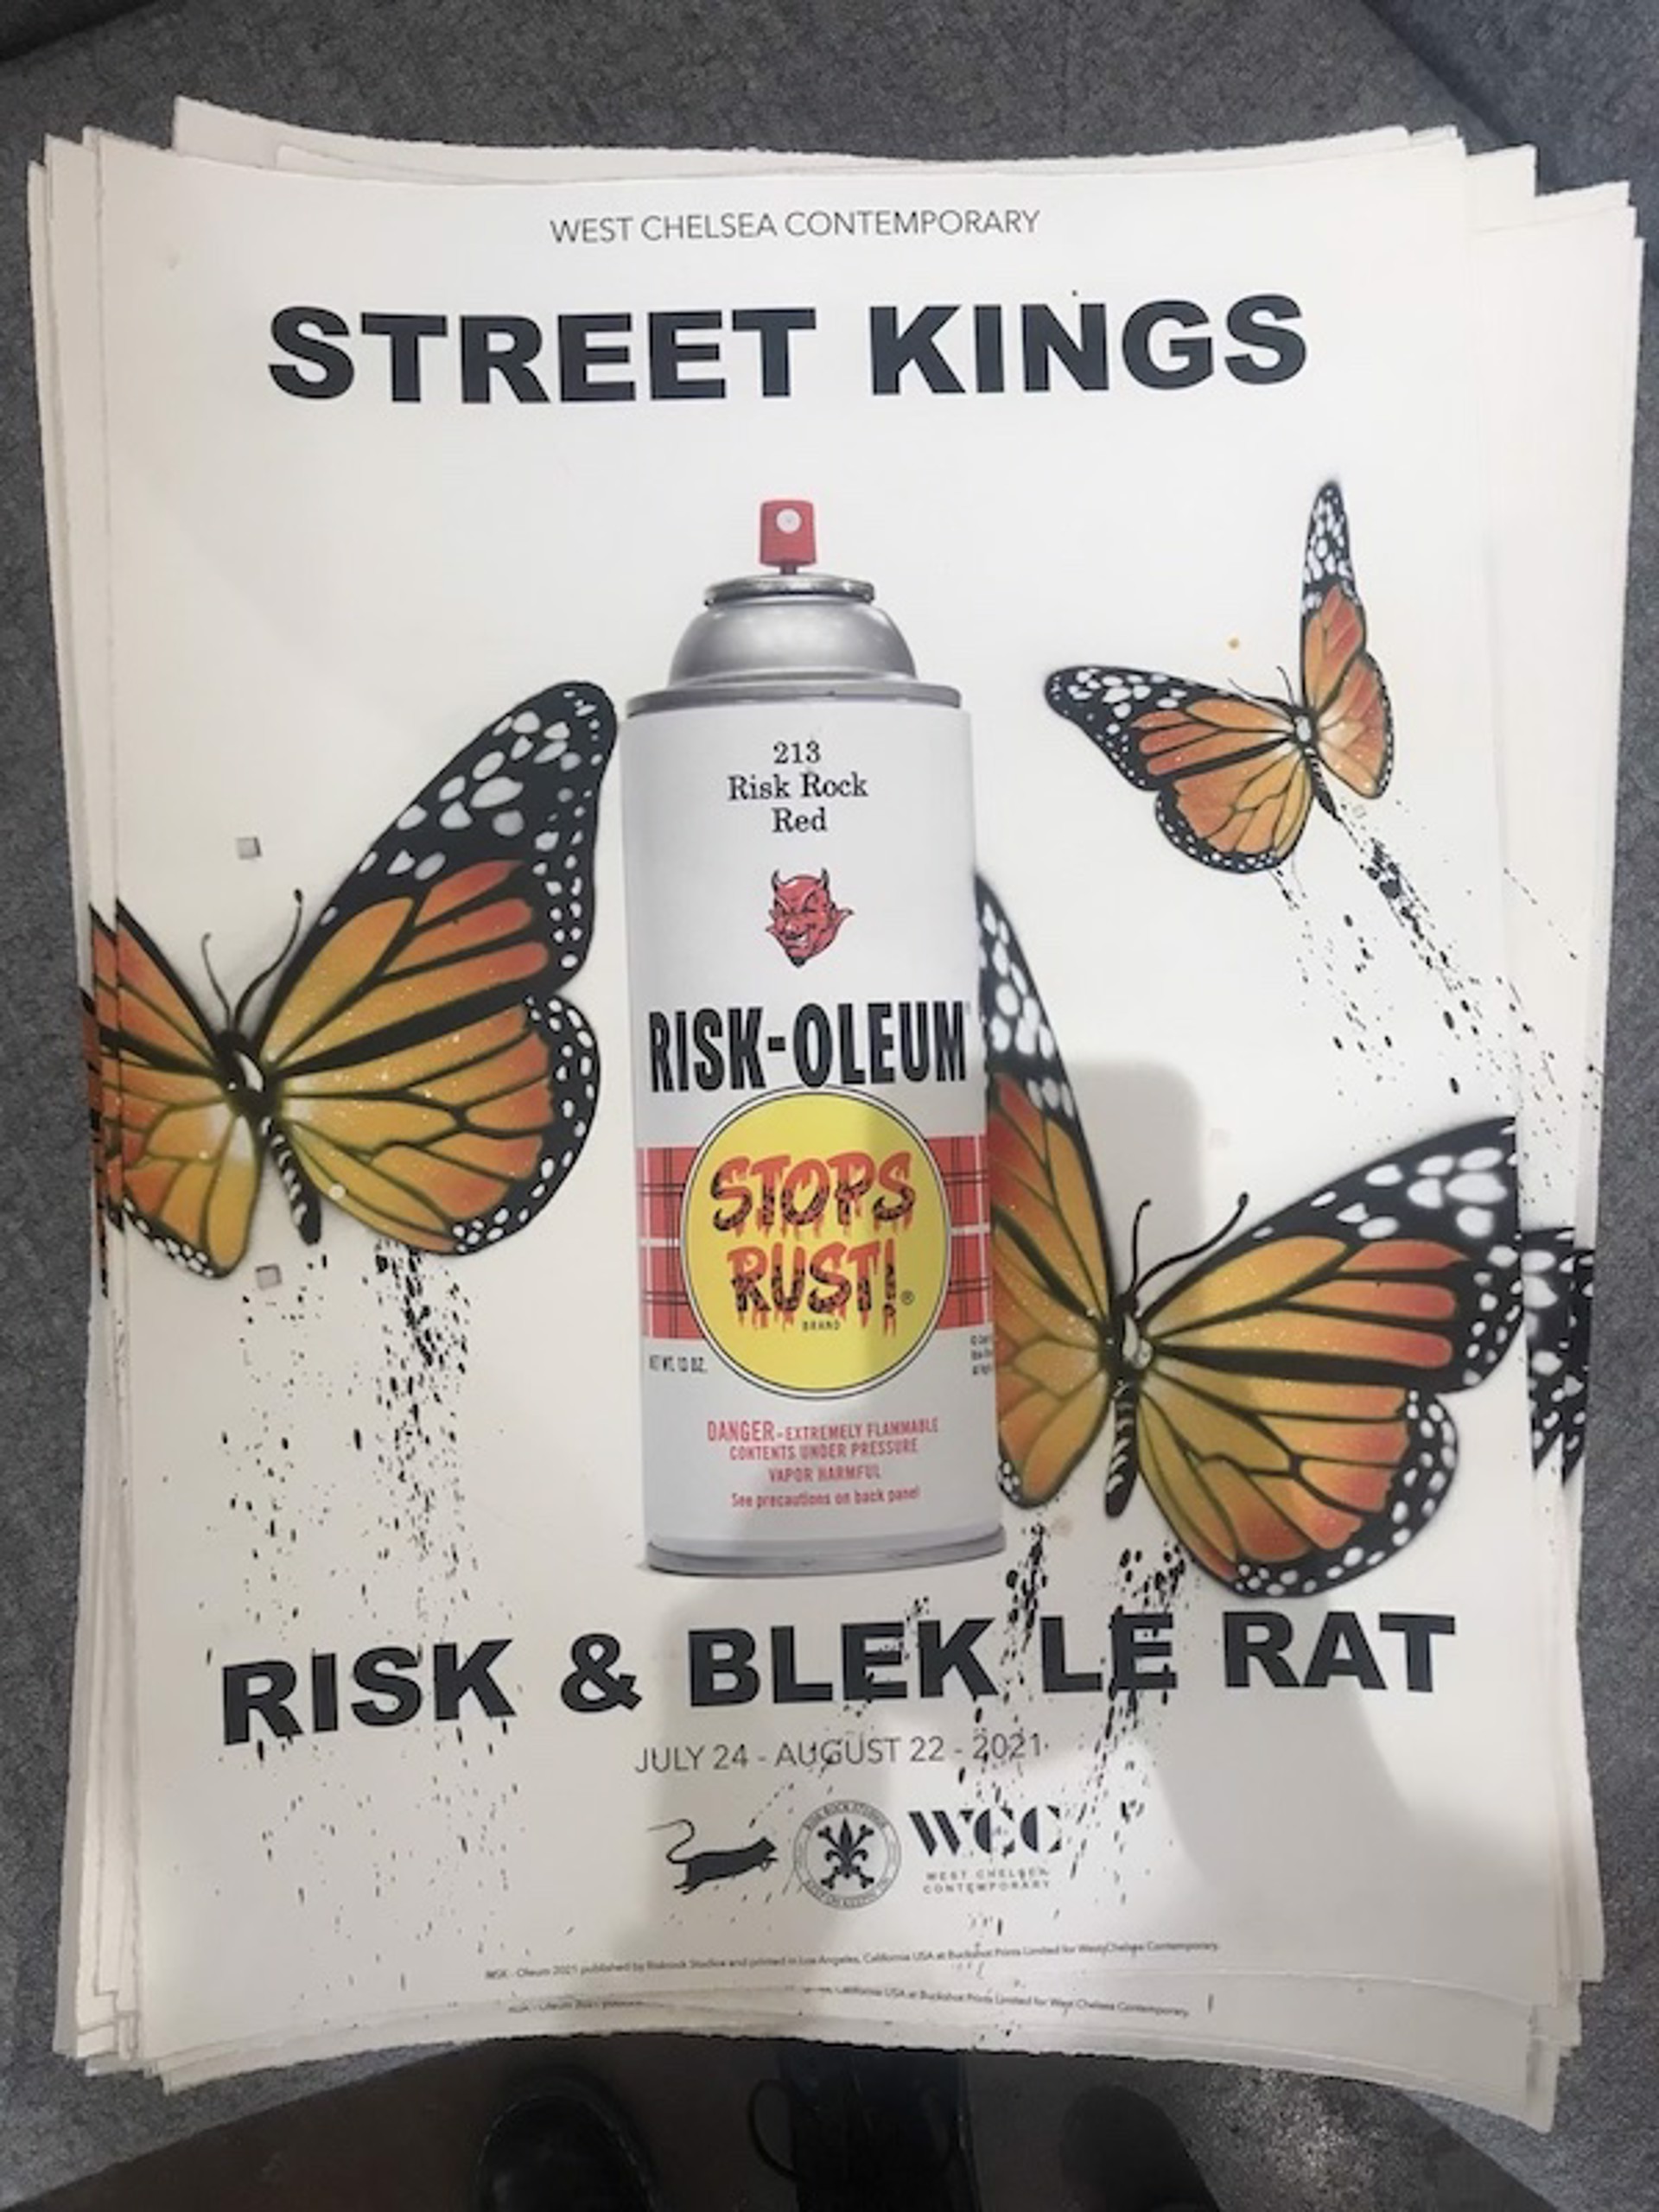 Street Kings Show Print (46/50) by Risk